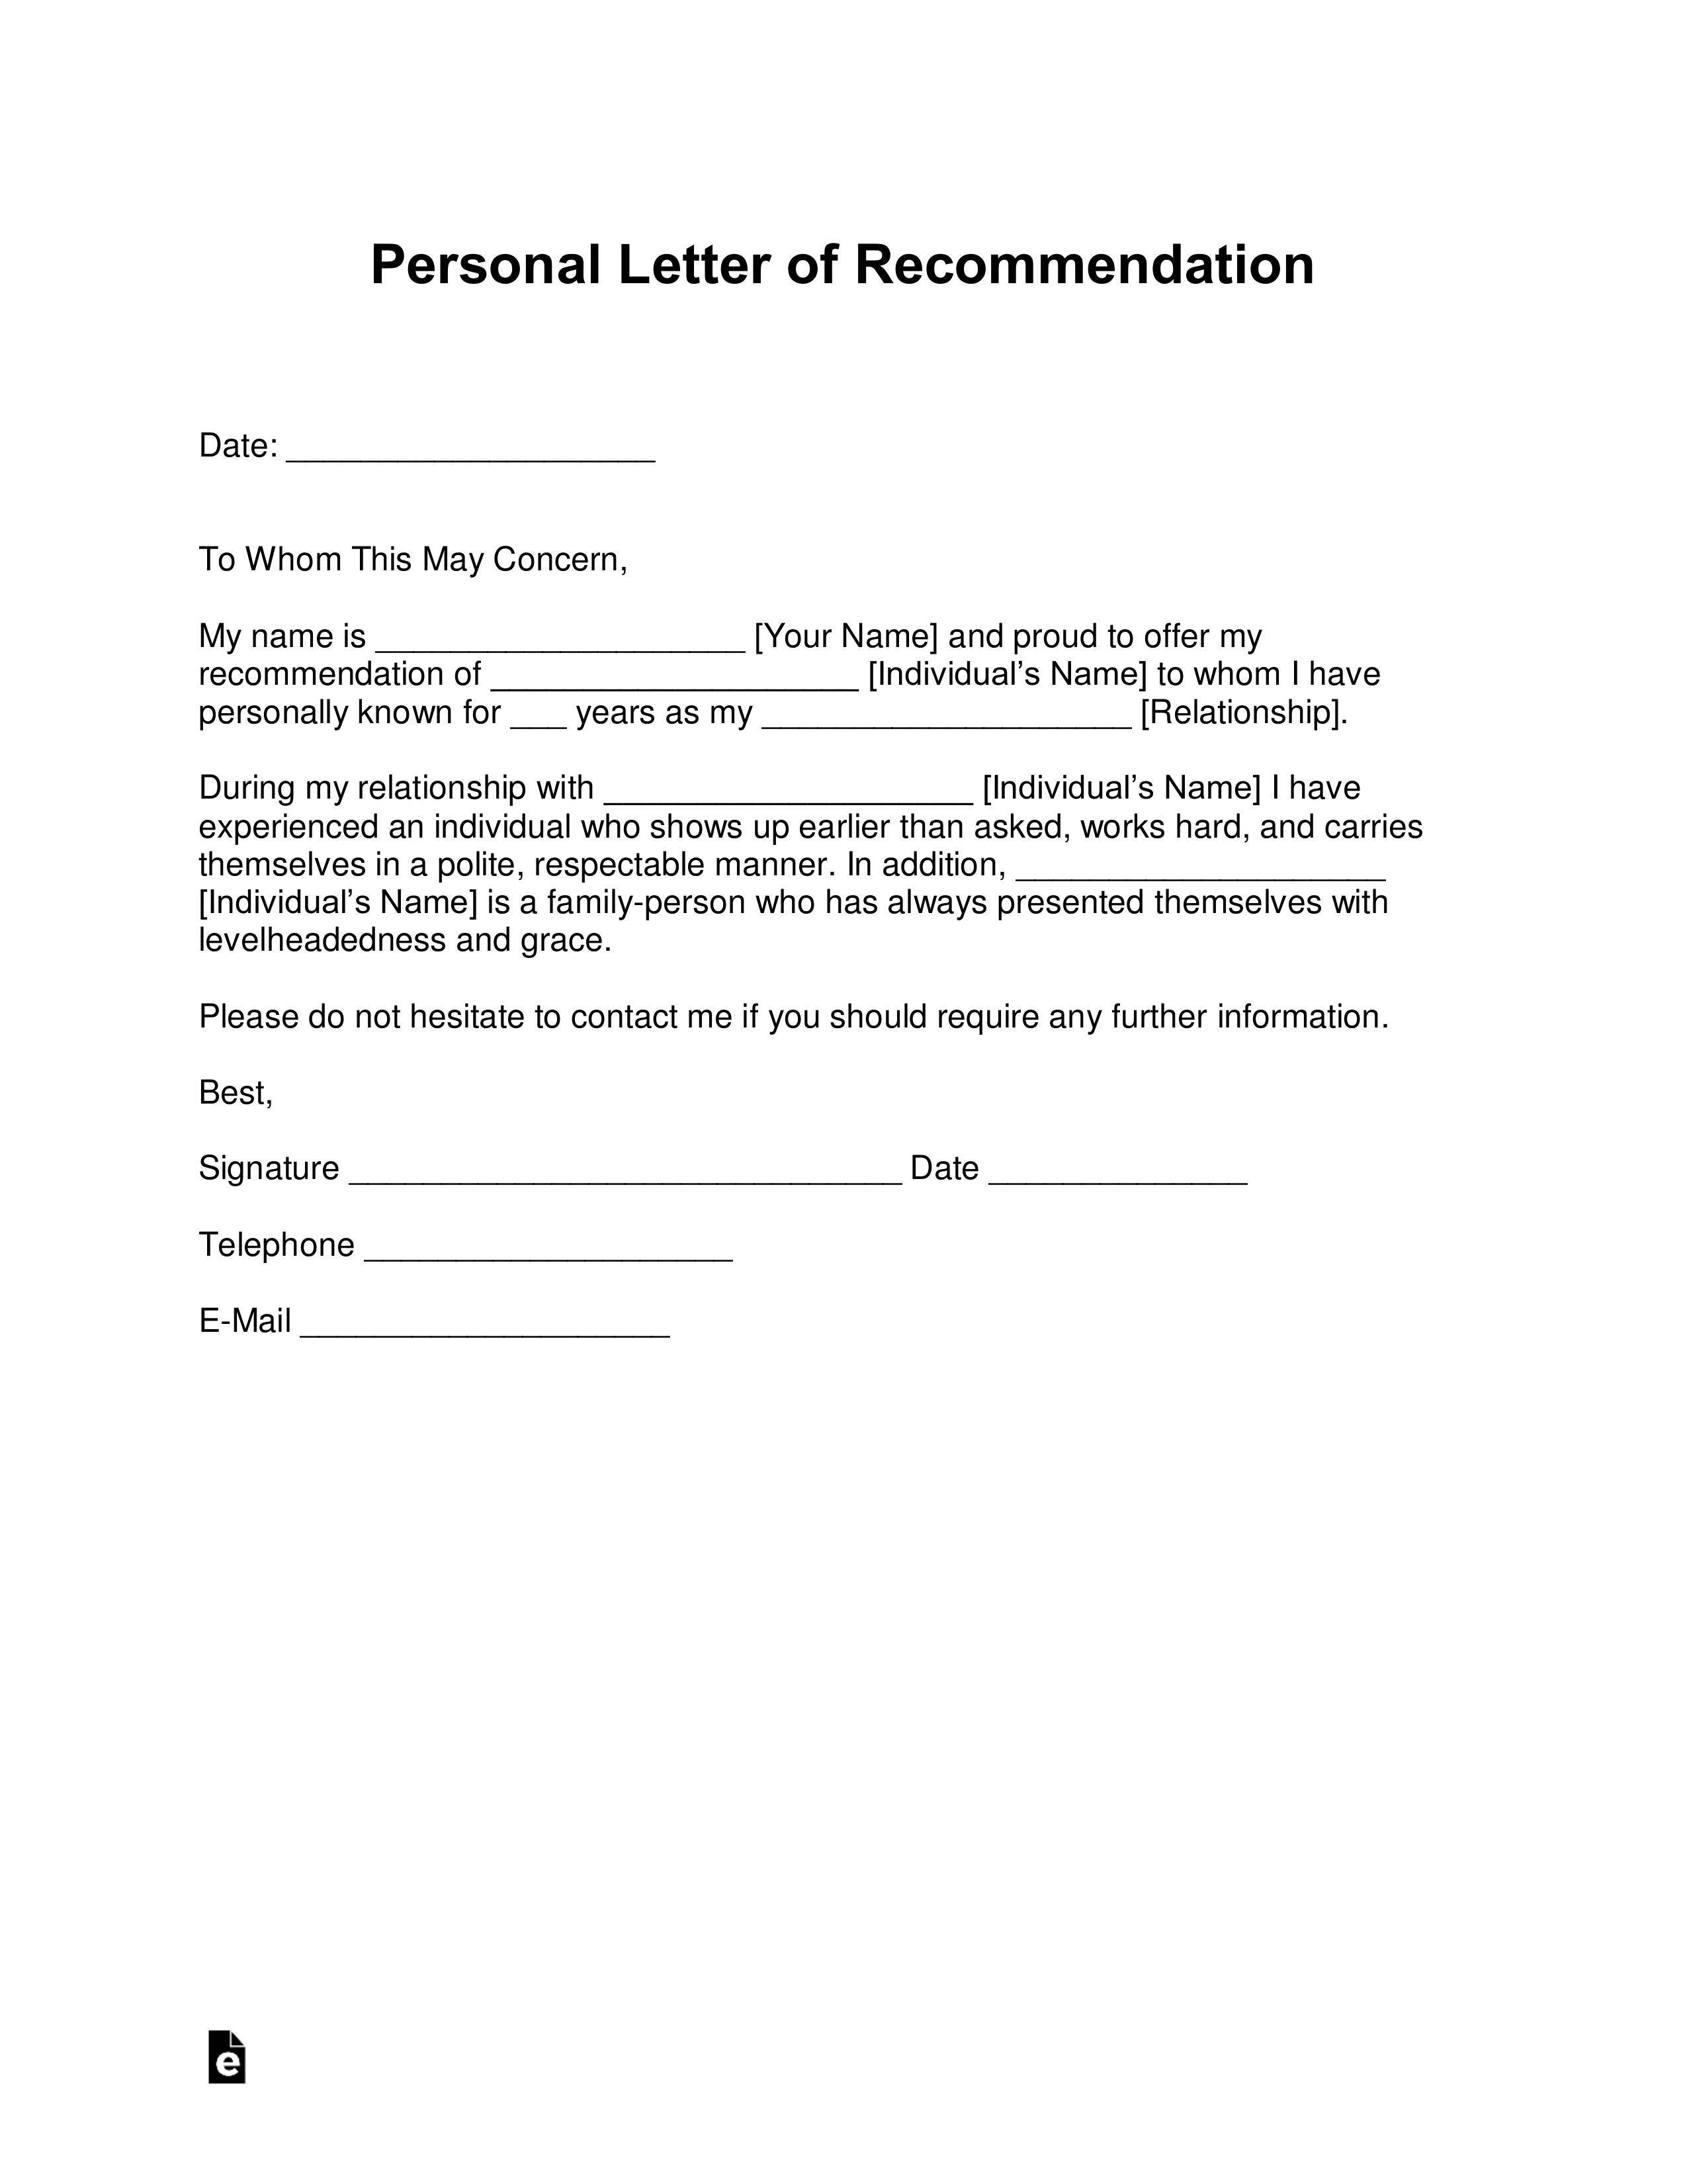 Employee Recommendation Letter Example from eforms.com